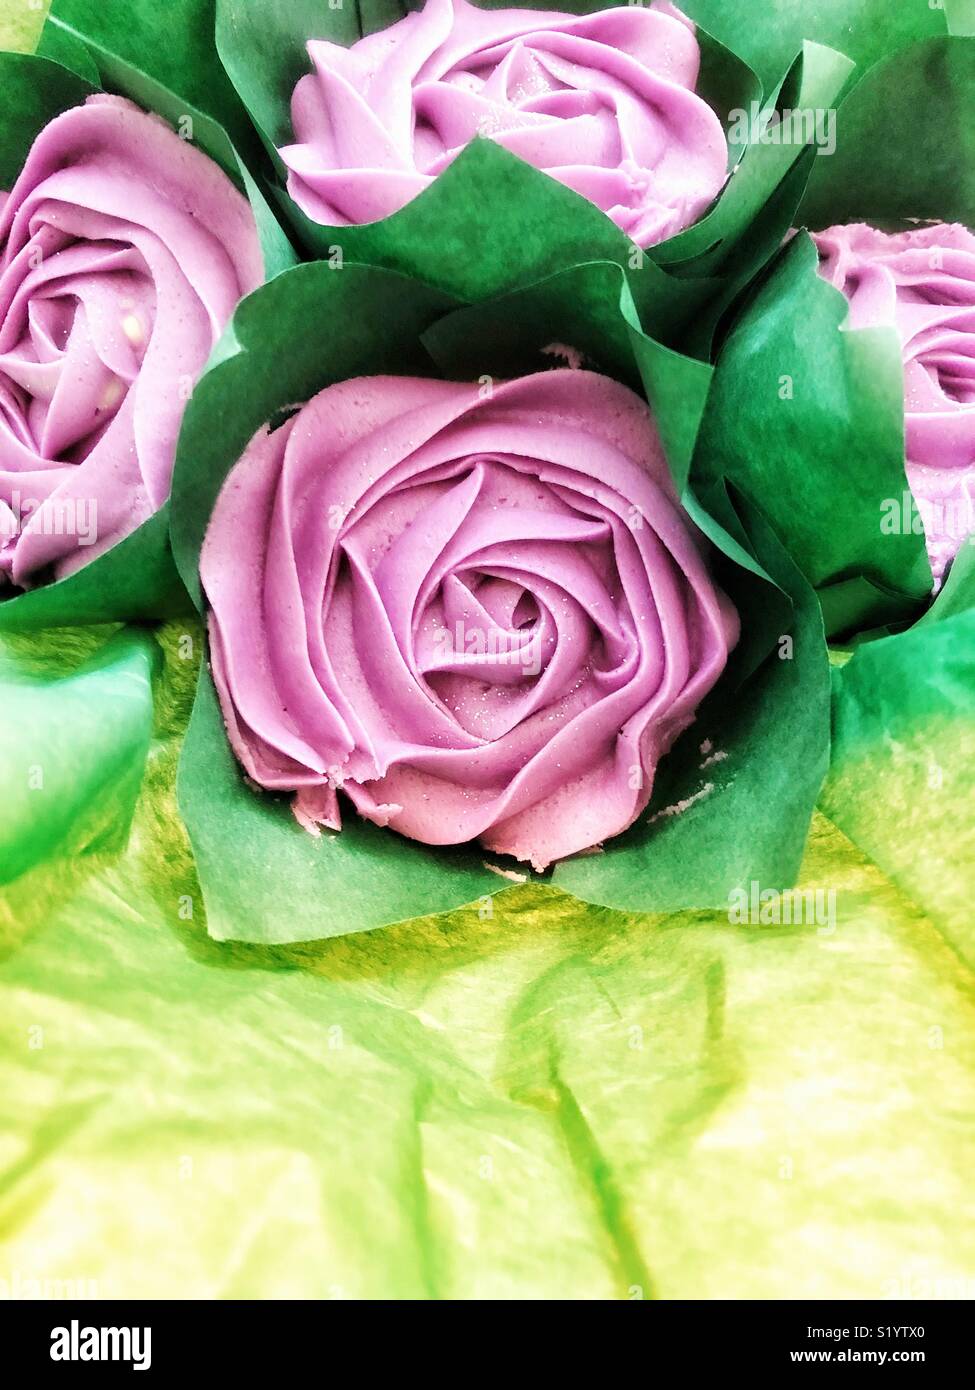 Food art,flowers that are made of piped icing. With a green grease proof paper for leaves. Stock Photo